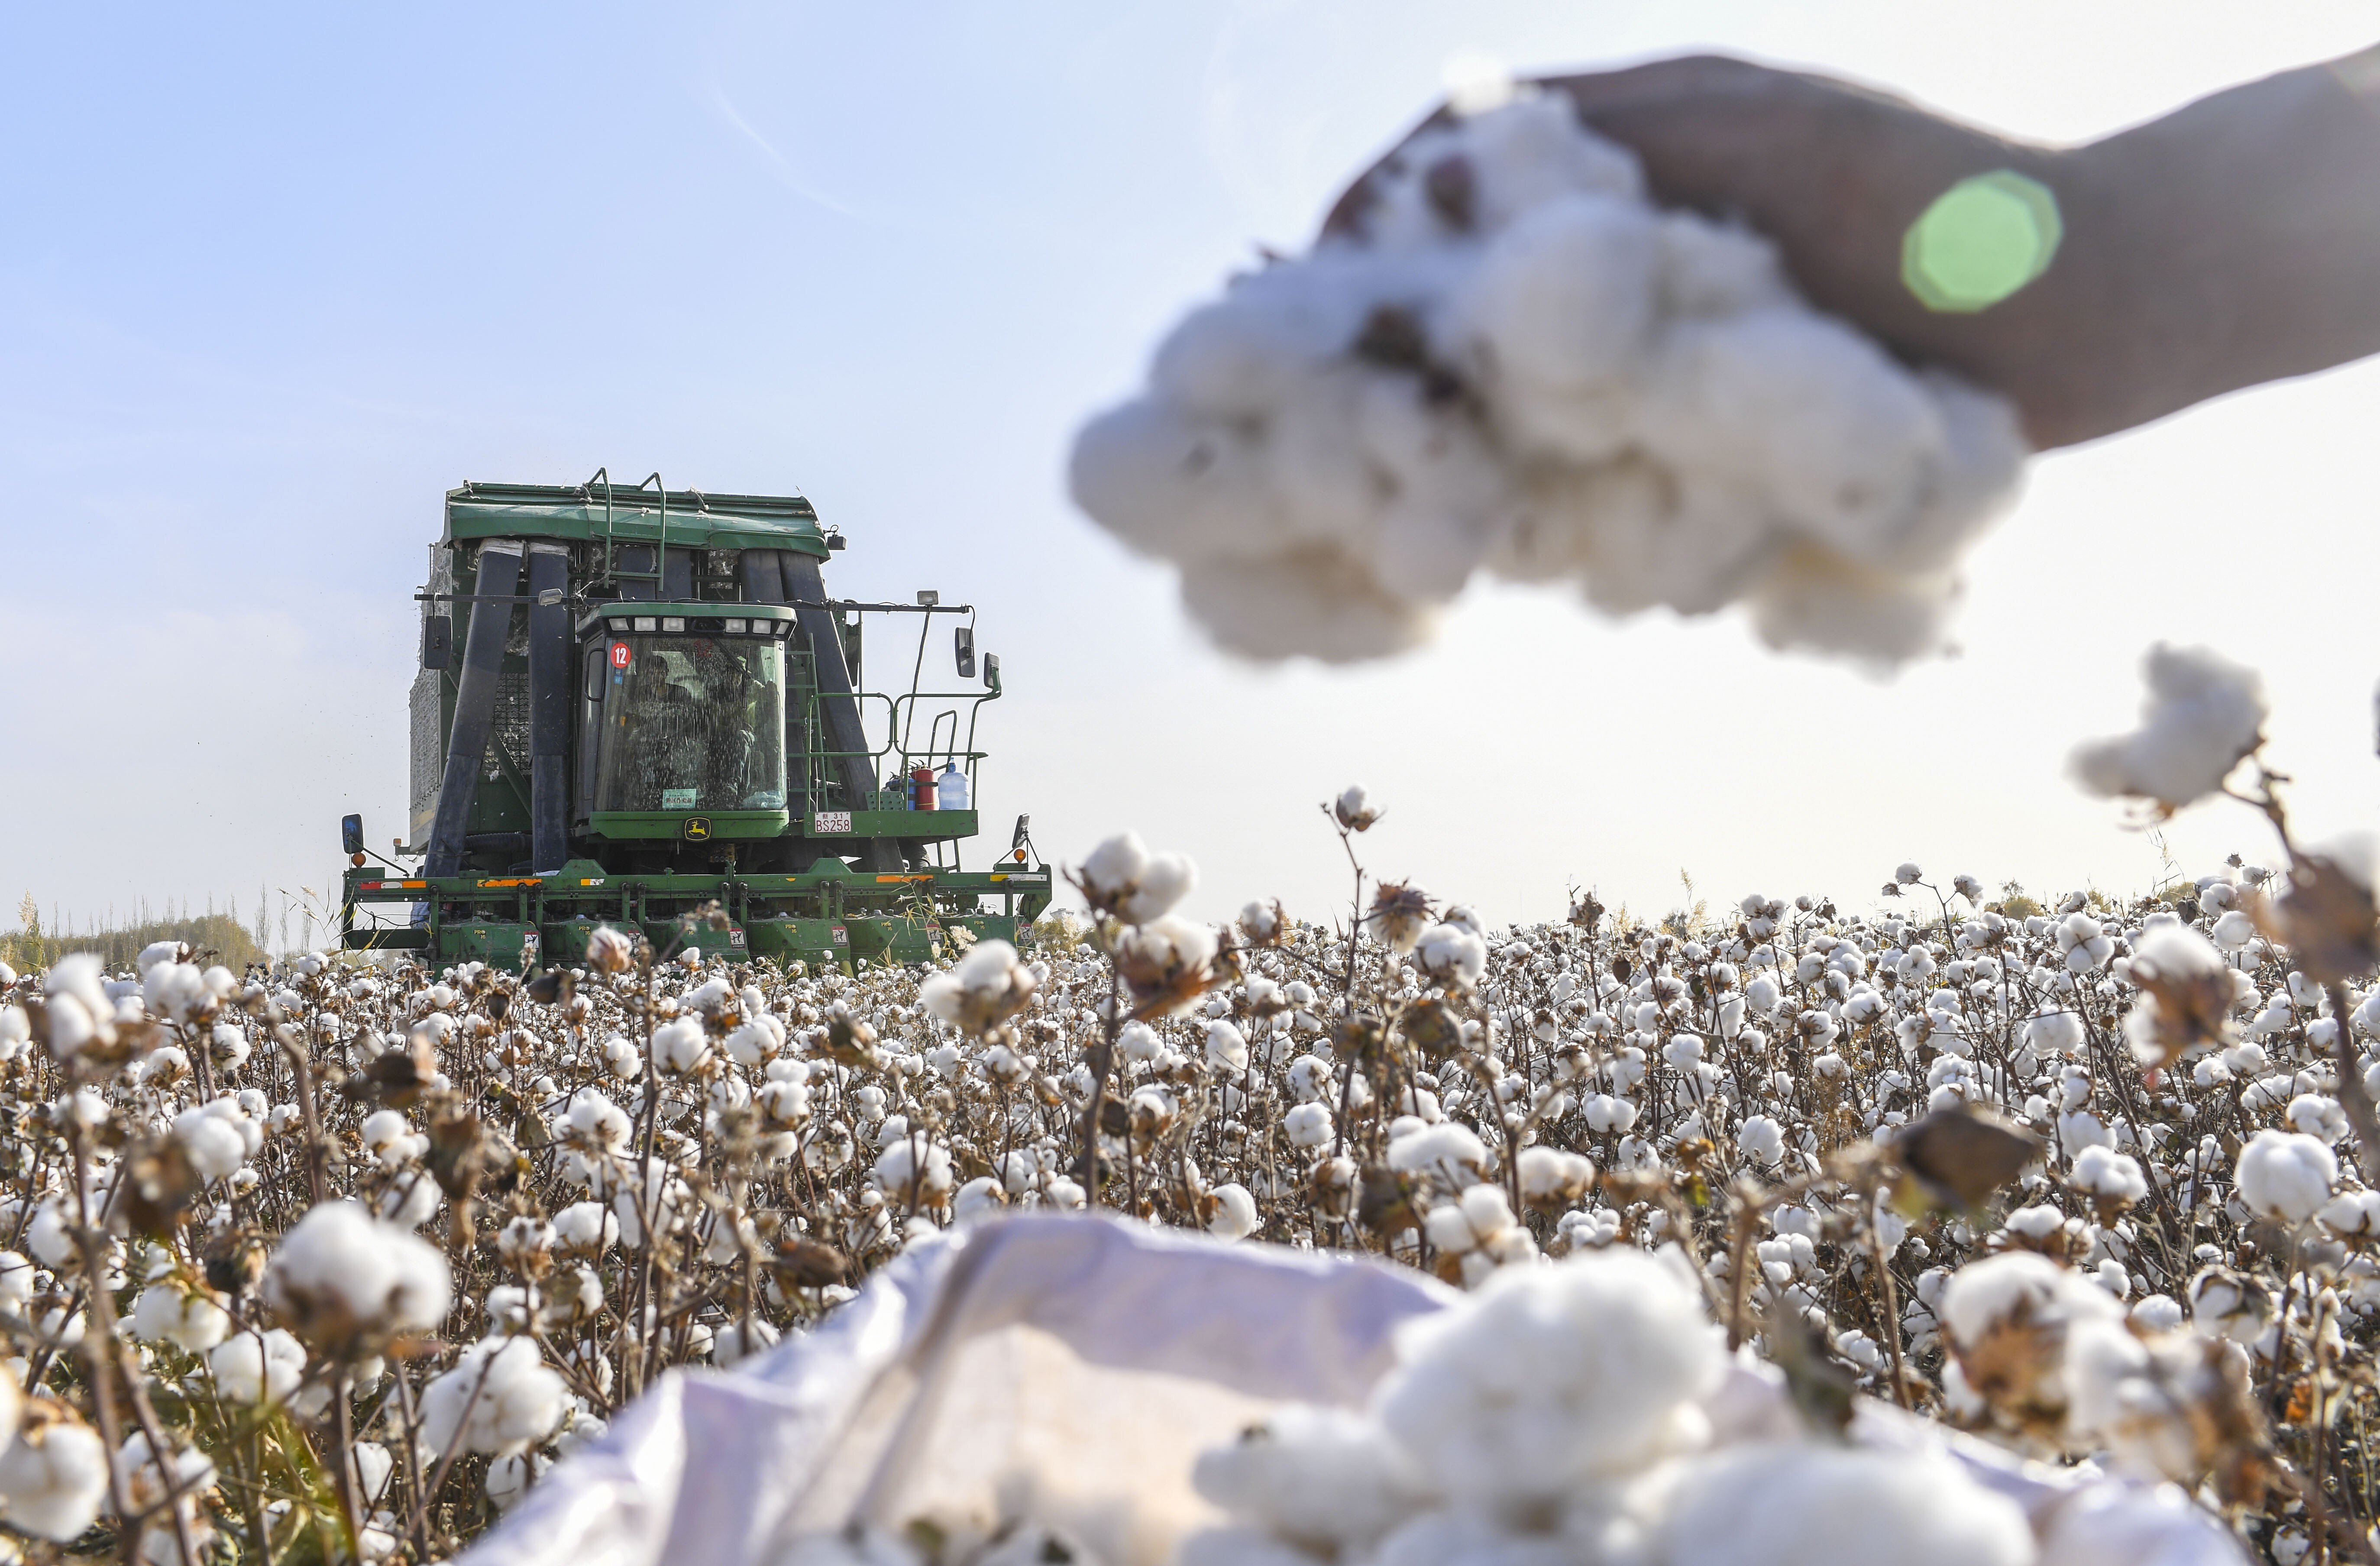 A harvester moves through a cotton field in Dolatbag in northwest China’s Xinjiang region. Most of China’s cotton crop is grown in Xinjiang, where firms that supply global brands are accused of using Uygur forced labour. Photo: Xinhua